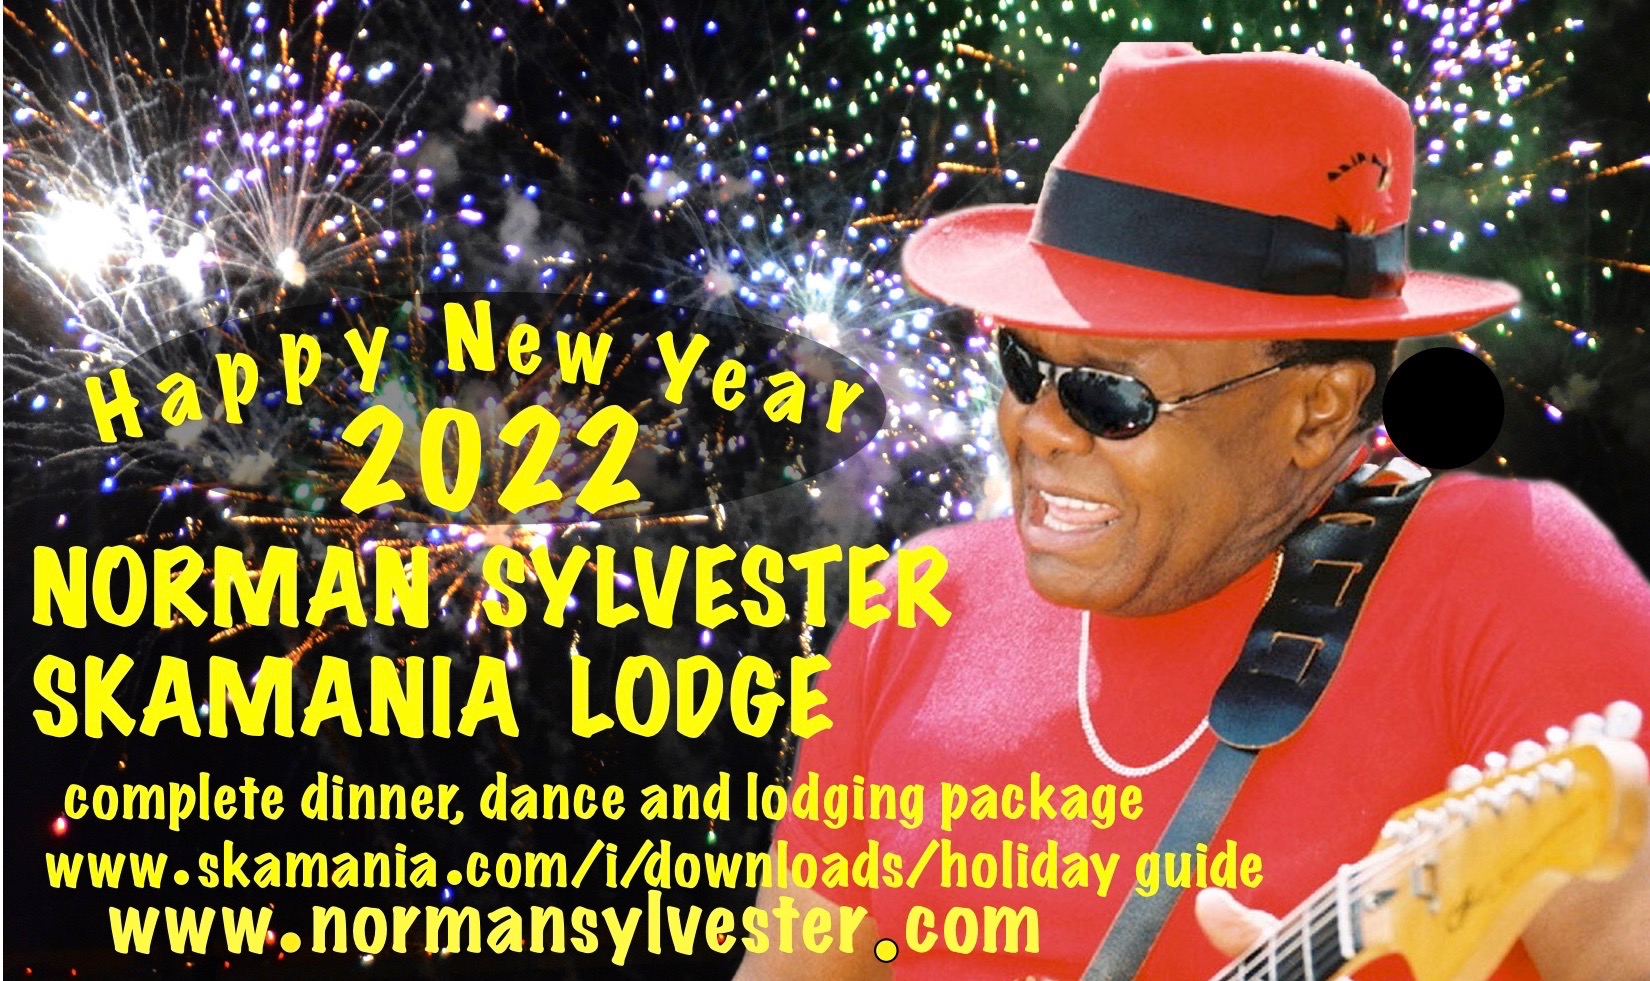 Happy New Year 2022. Norman Sylvester - Skamania Lodge. complete dinner, dance and lodging package www.skamania.com/i/downloads/holidayguide - www.normansylvester.com